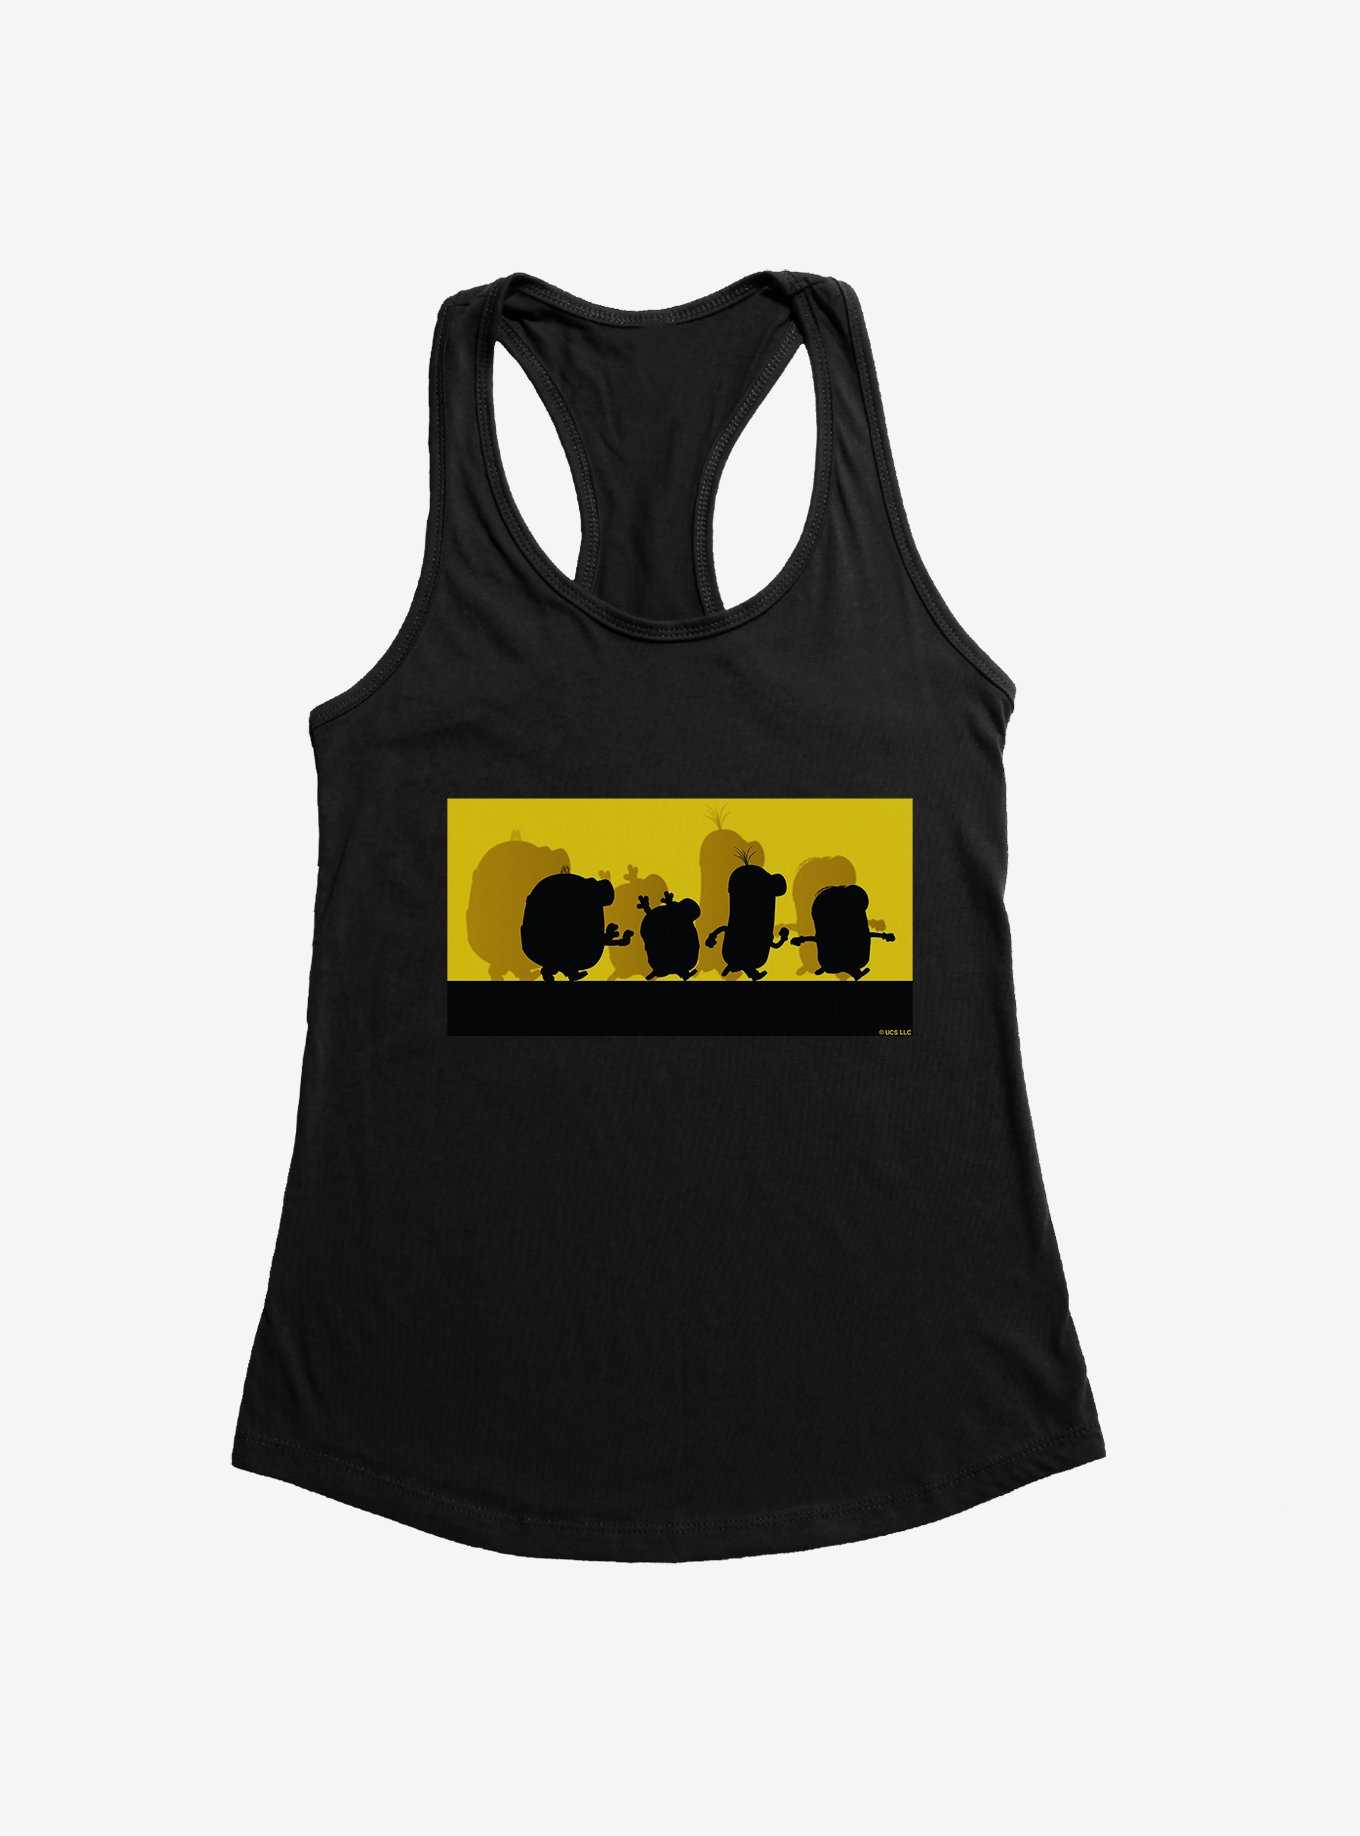 Minions Group Silhouette Womens Tank Top, , hi-res